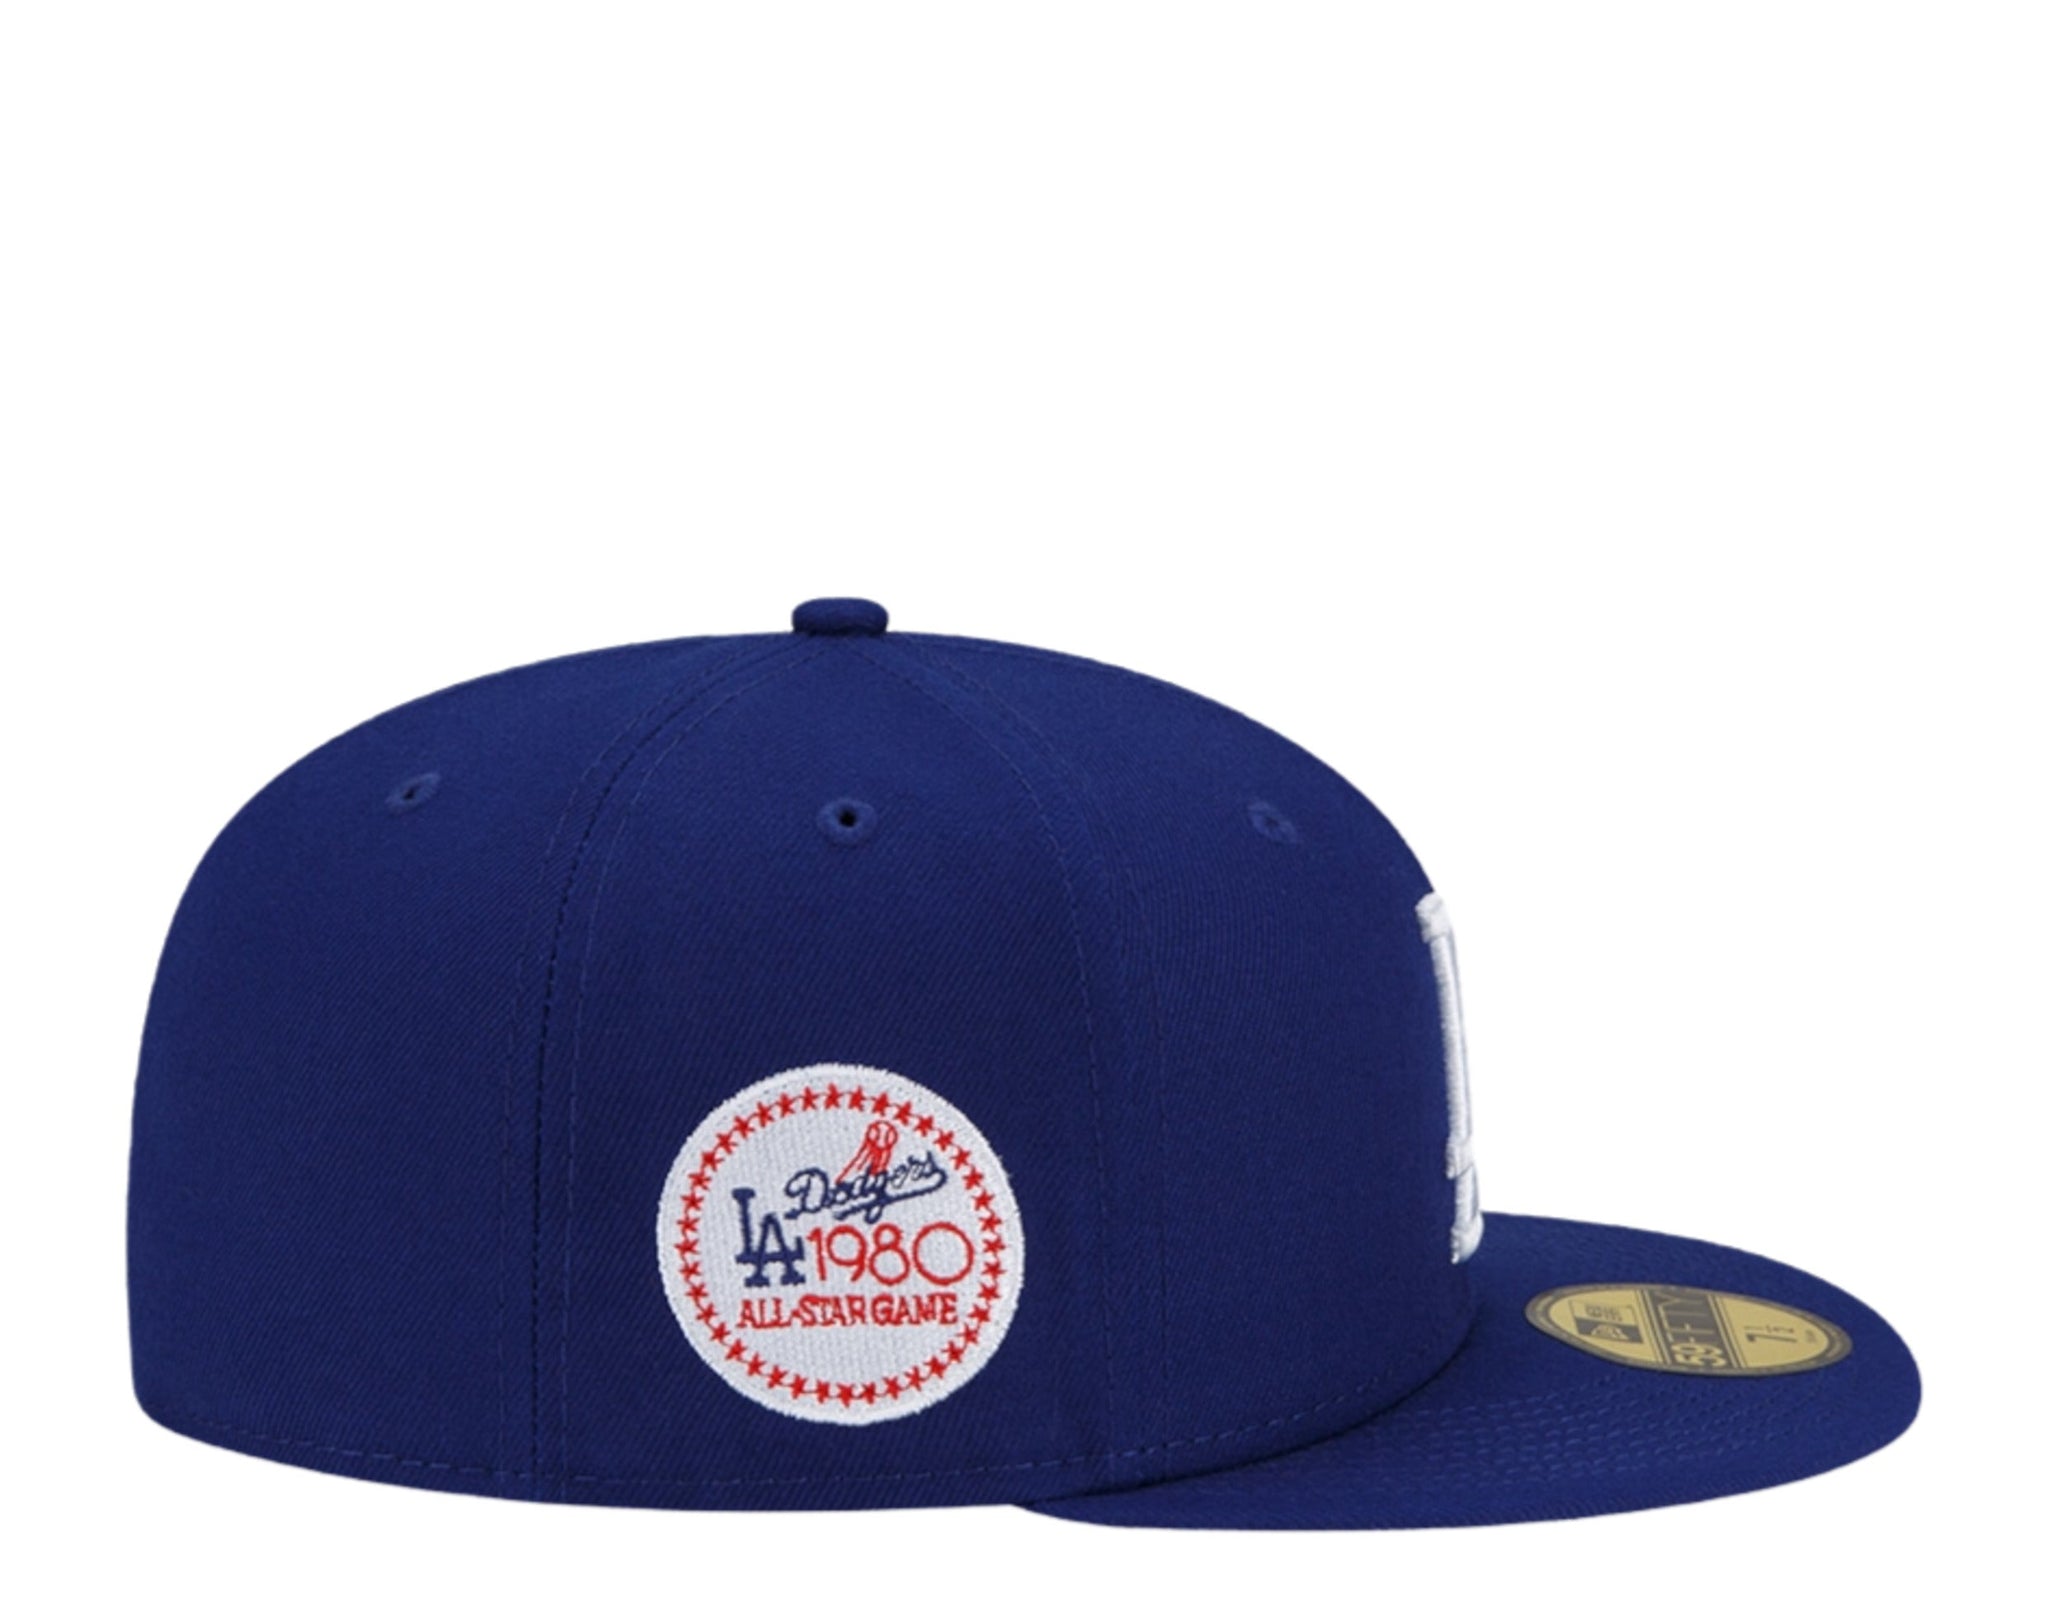 New Era 59FIFTY Los Angeles Dodgers 1980 All Star Game Fitted